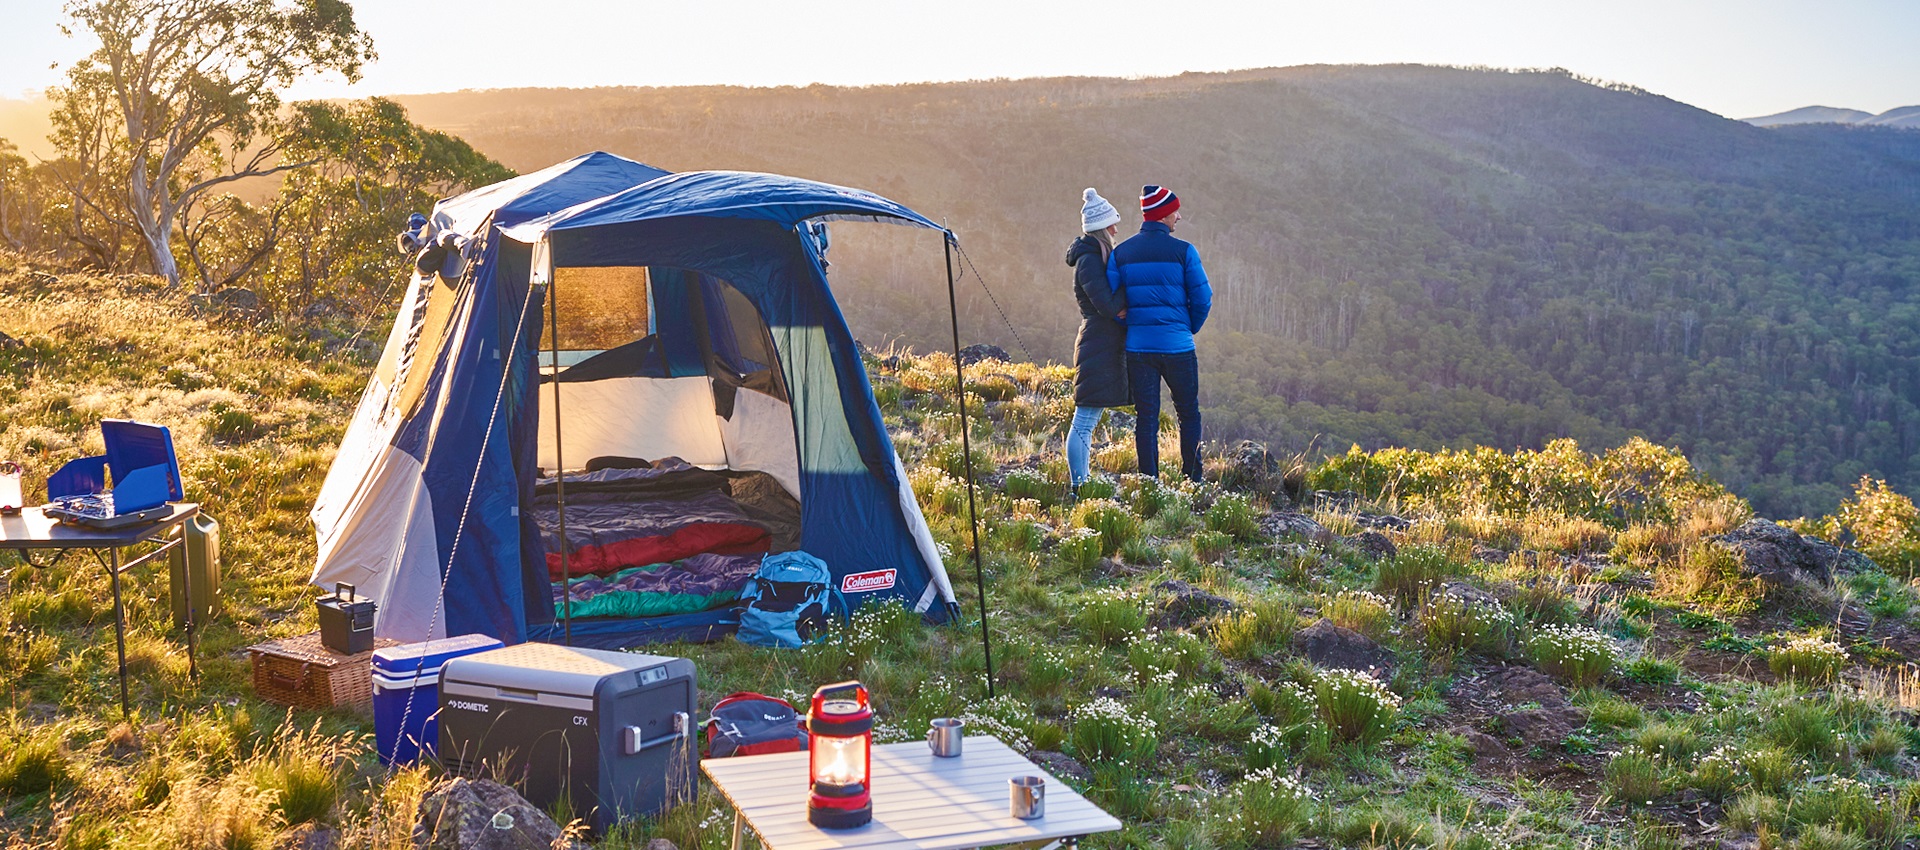 How To Be Self Sufficient When Camping Off The Grid